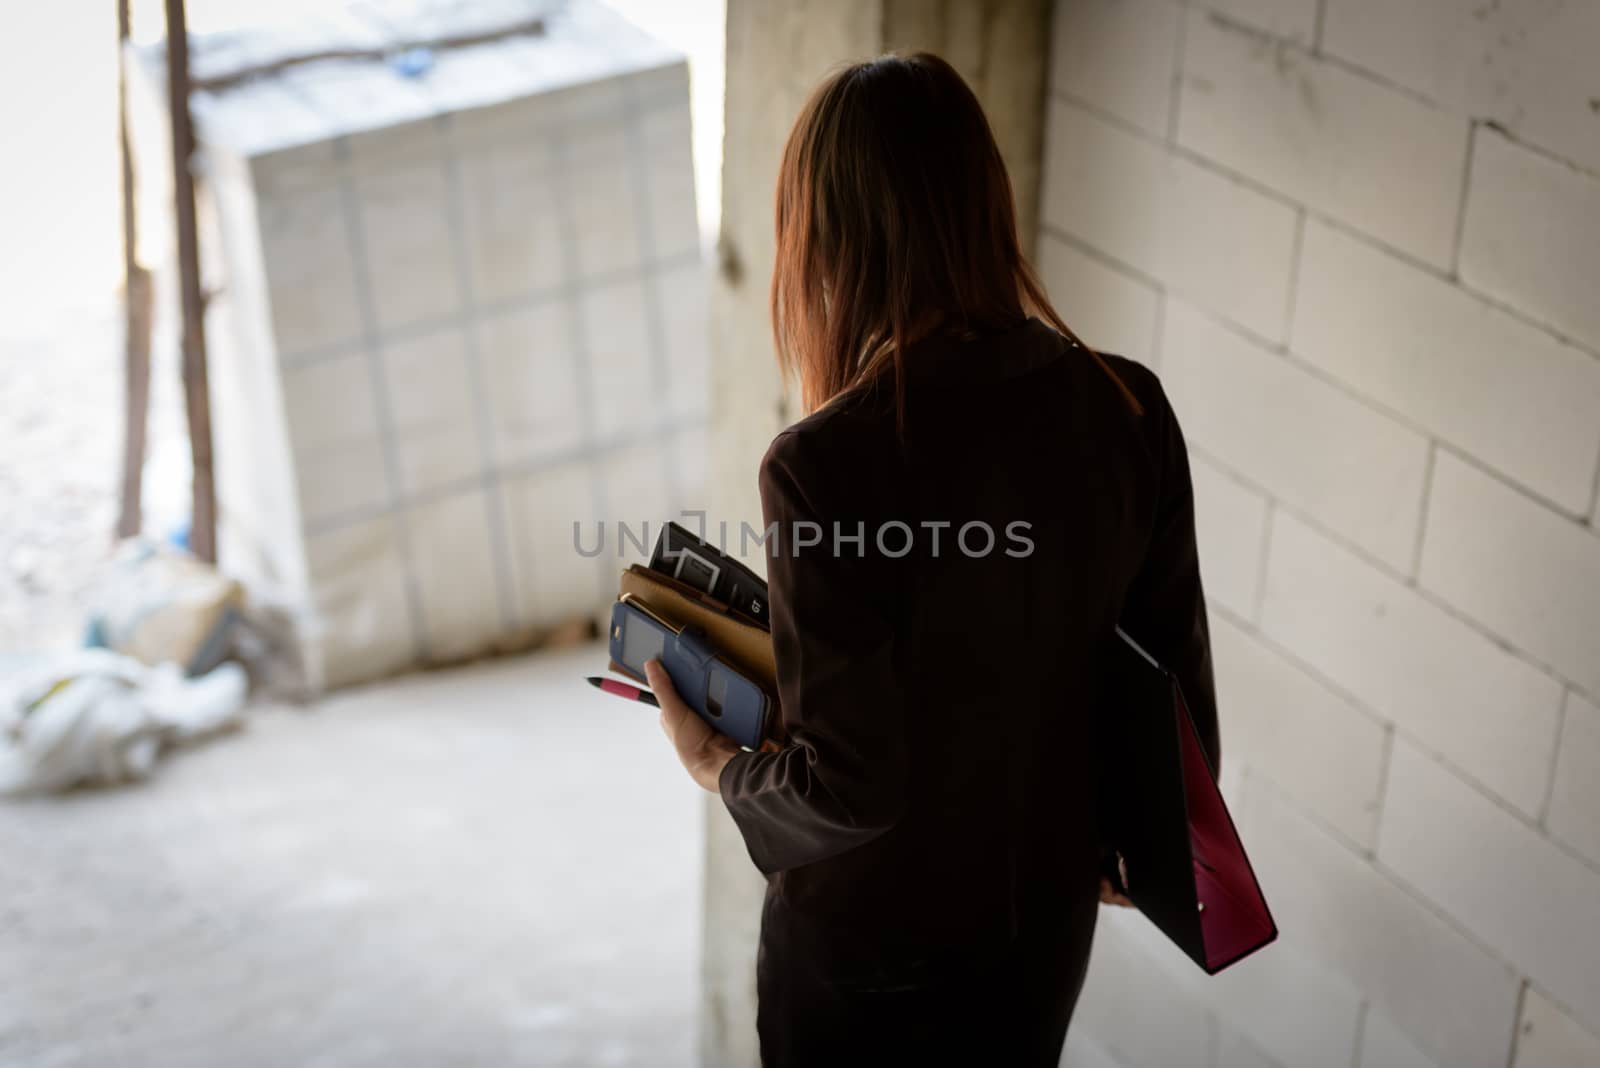 A businesswoman holds a calculator while walking down a stairwell in a building under construction.